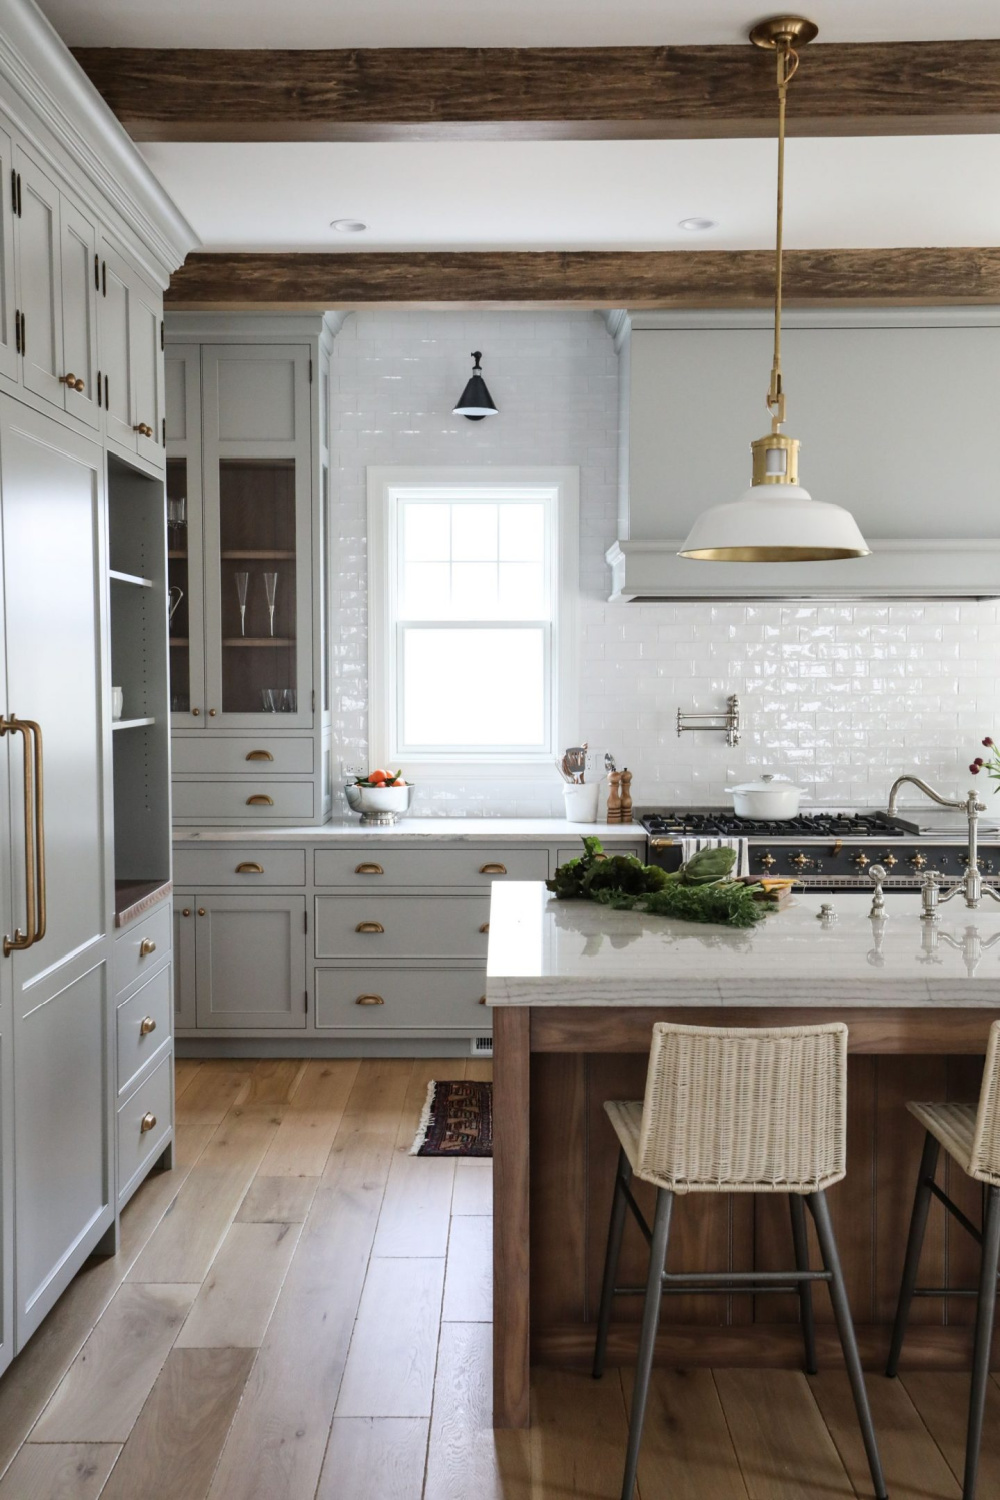 Lamp Room Gray (FB) painted cabinets in a traditional kitchen with classic style and sophistication from Park & Oak. Come see inspiring photos and learn 16 simple yet sophisticated kitchen design ideas.